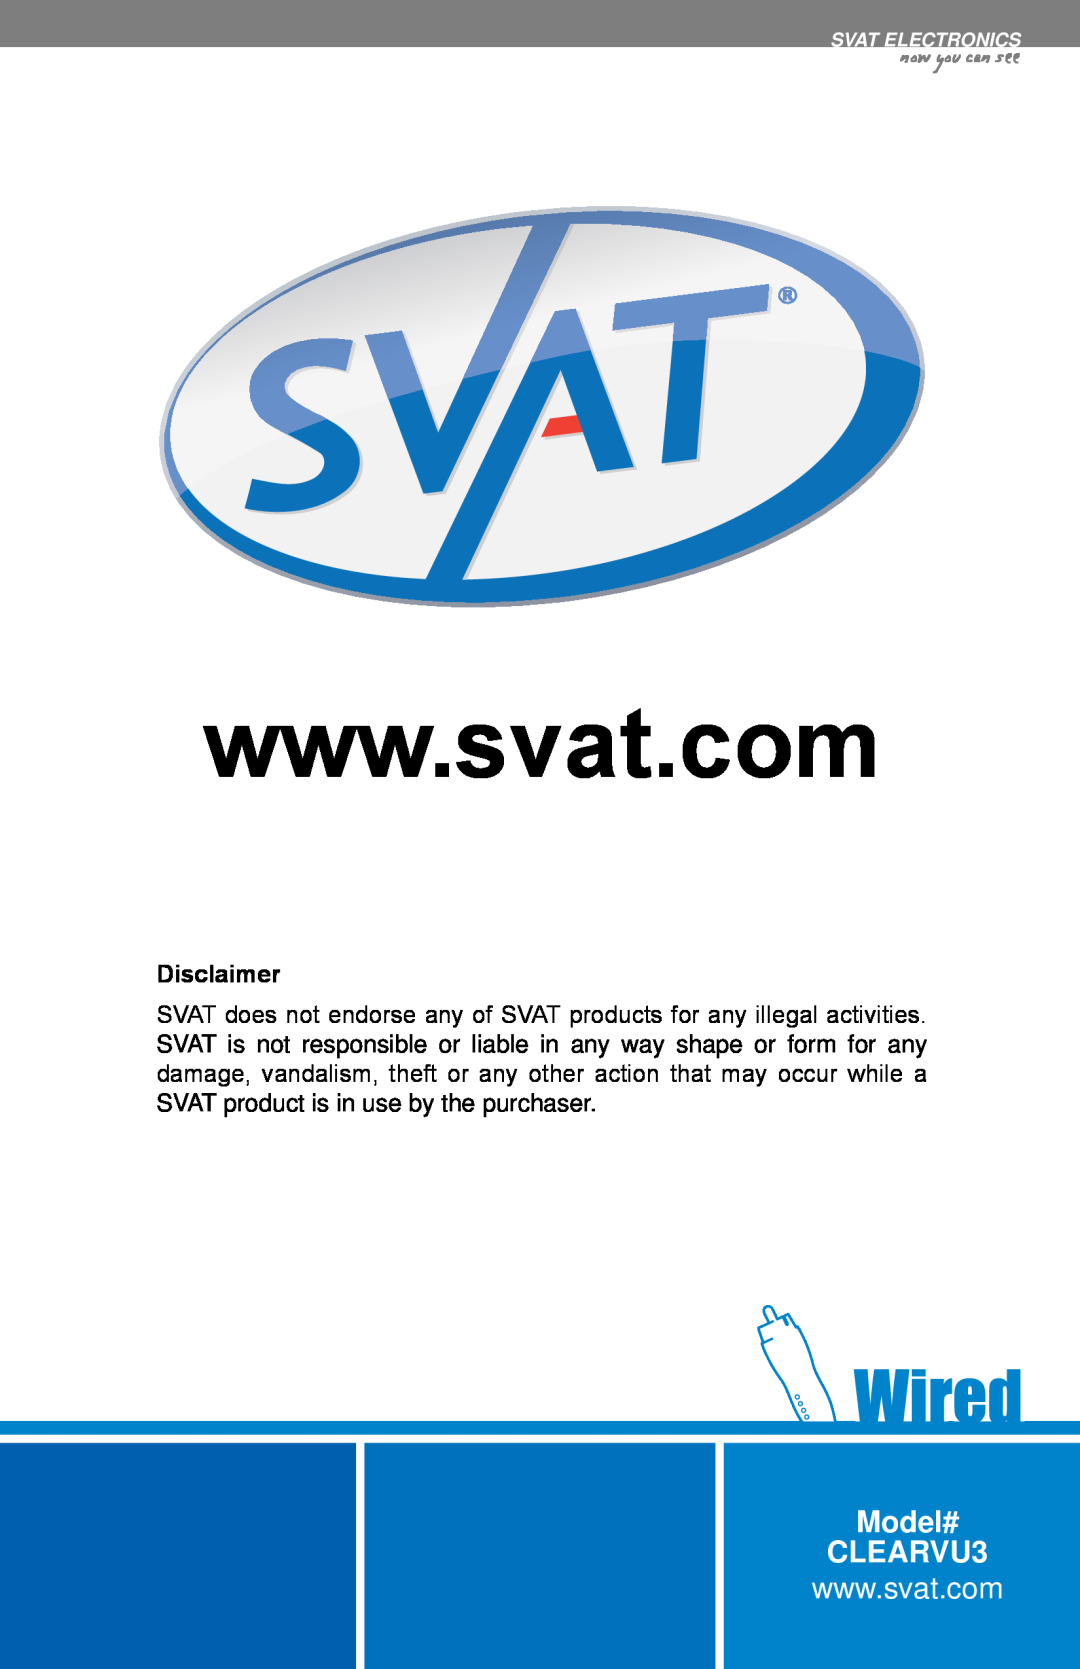 SVAT Electronics instruction manual Disclaimer, now you can see, Model# CLEARVU3, Svat Electronics 